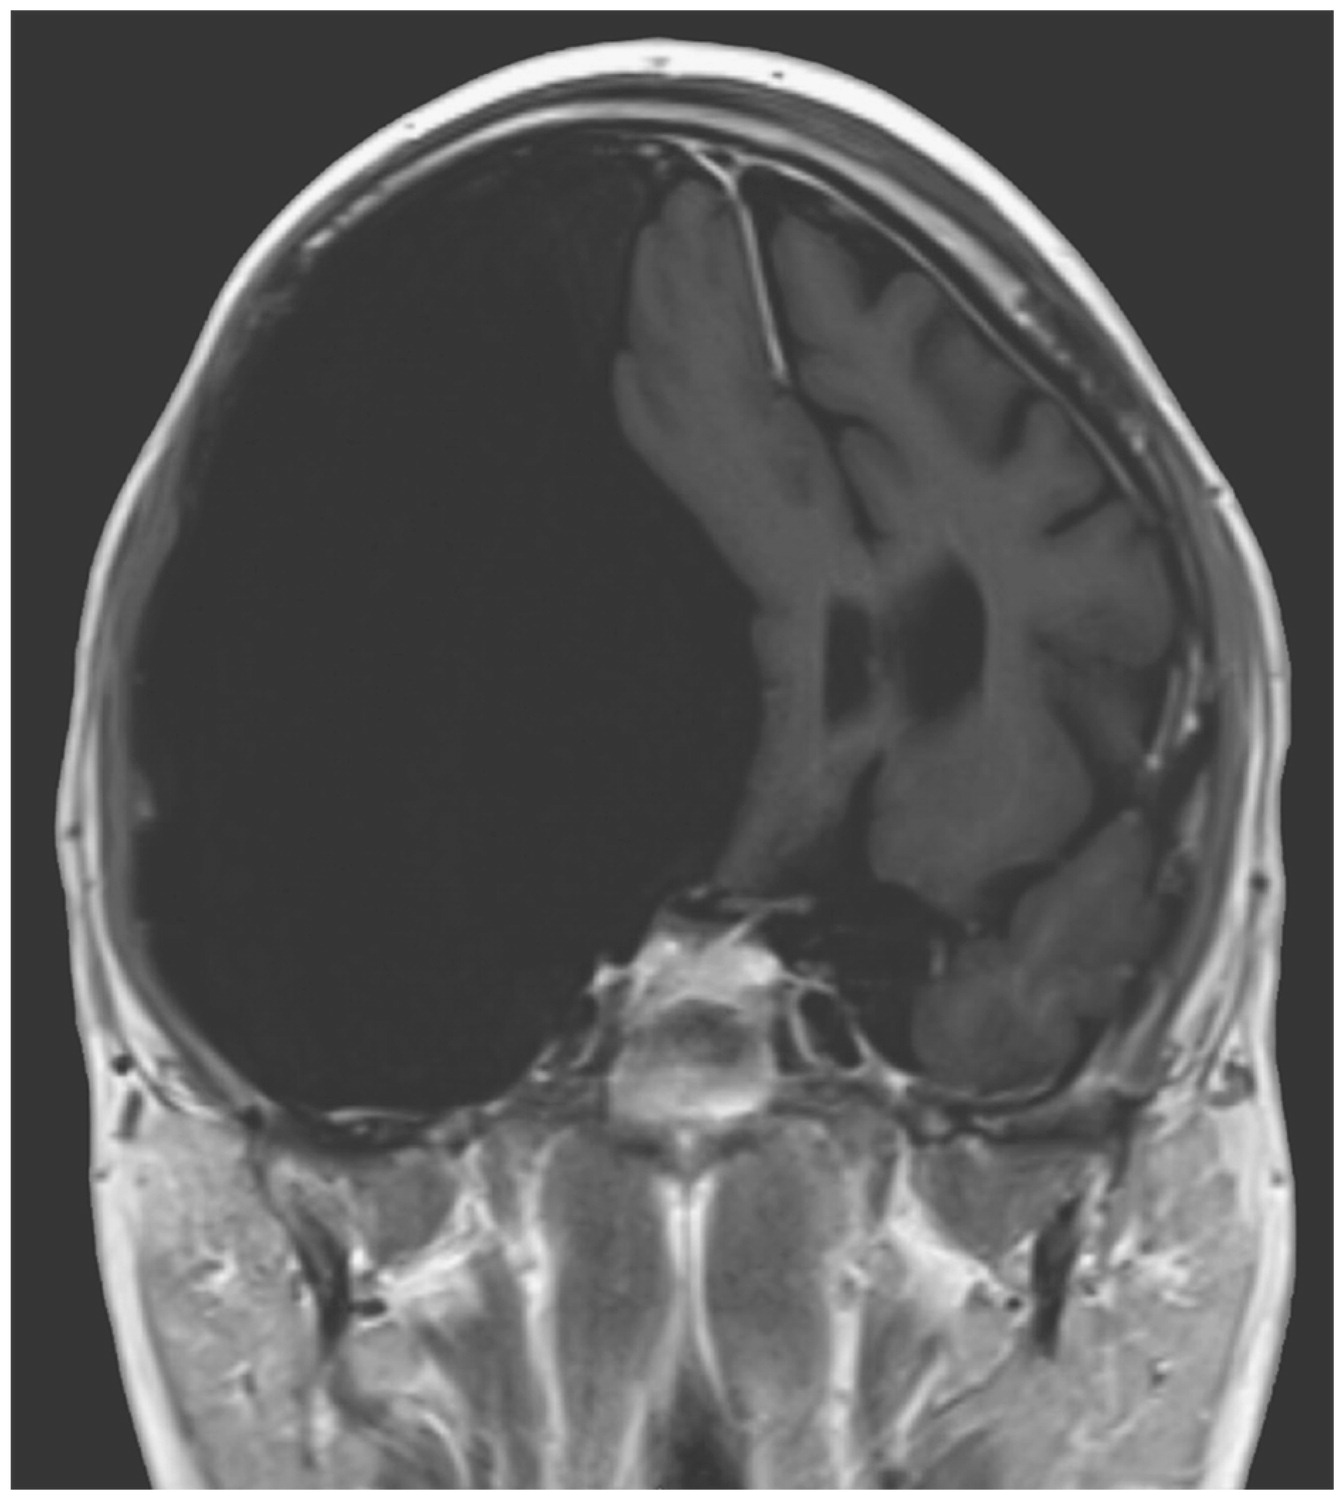 Look At This Incredible Brain Cyst